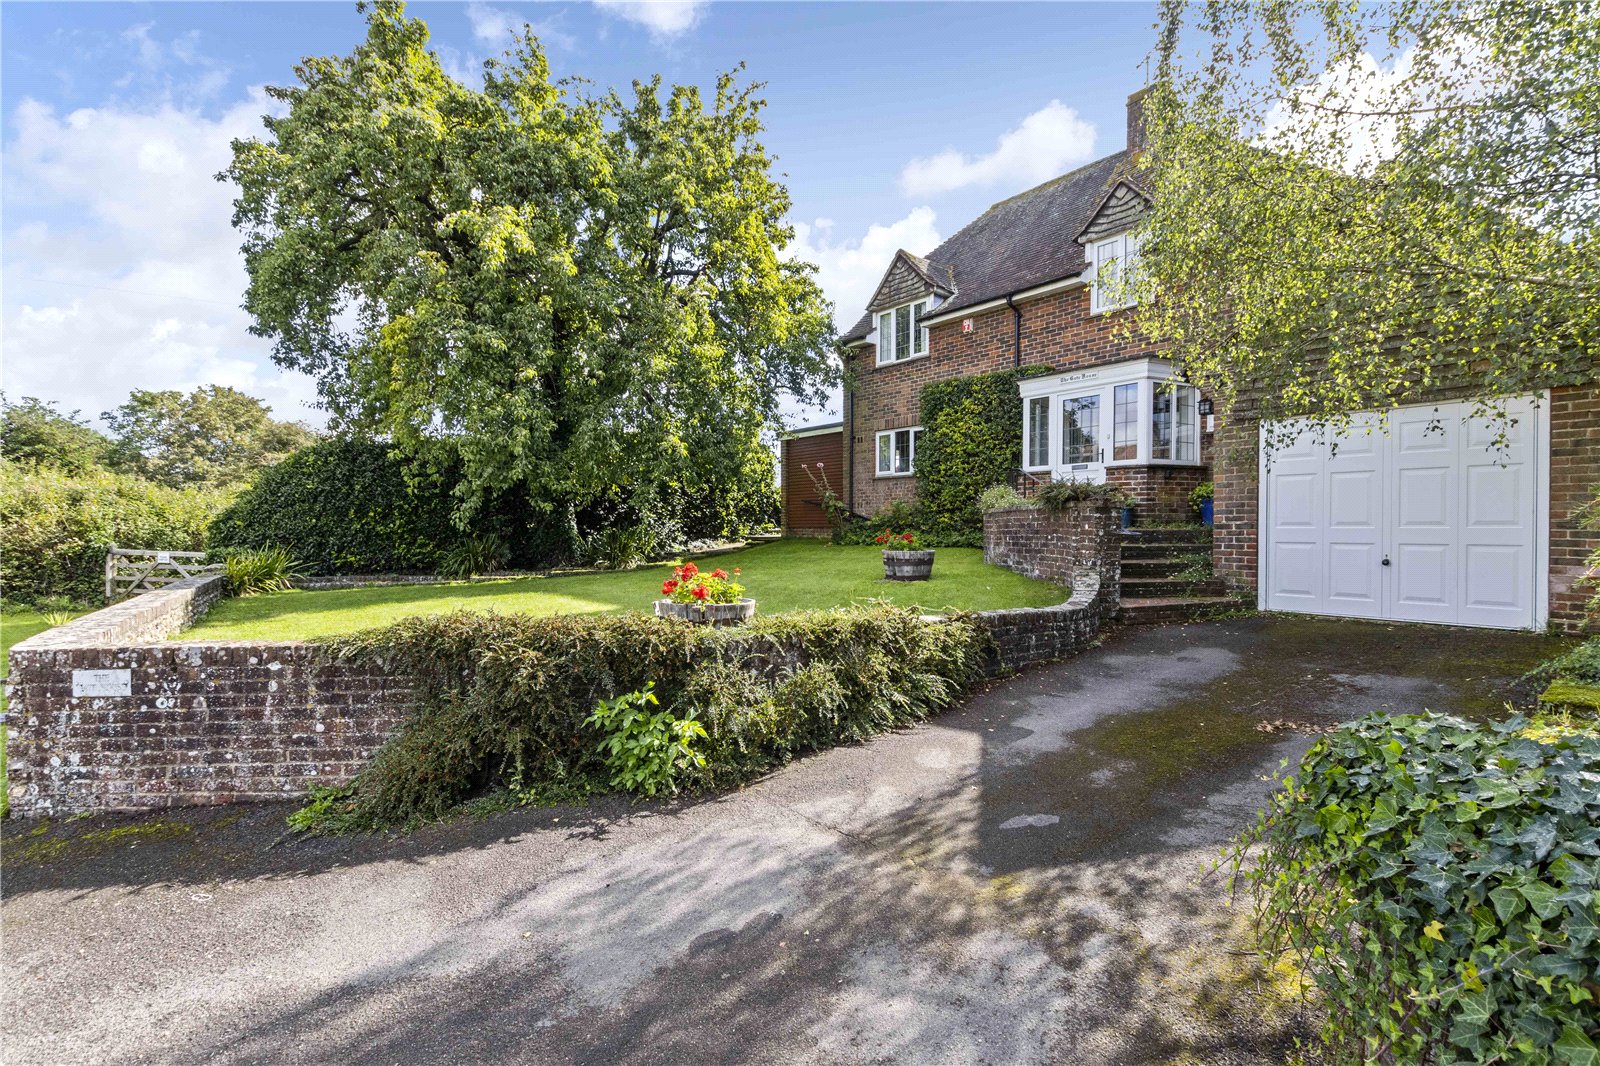 3 bed house for sale in Lower Road, East Lavant  - Property Image 1